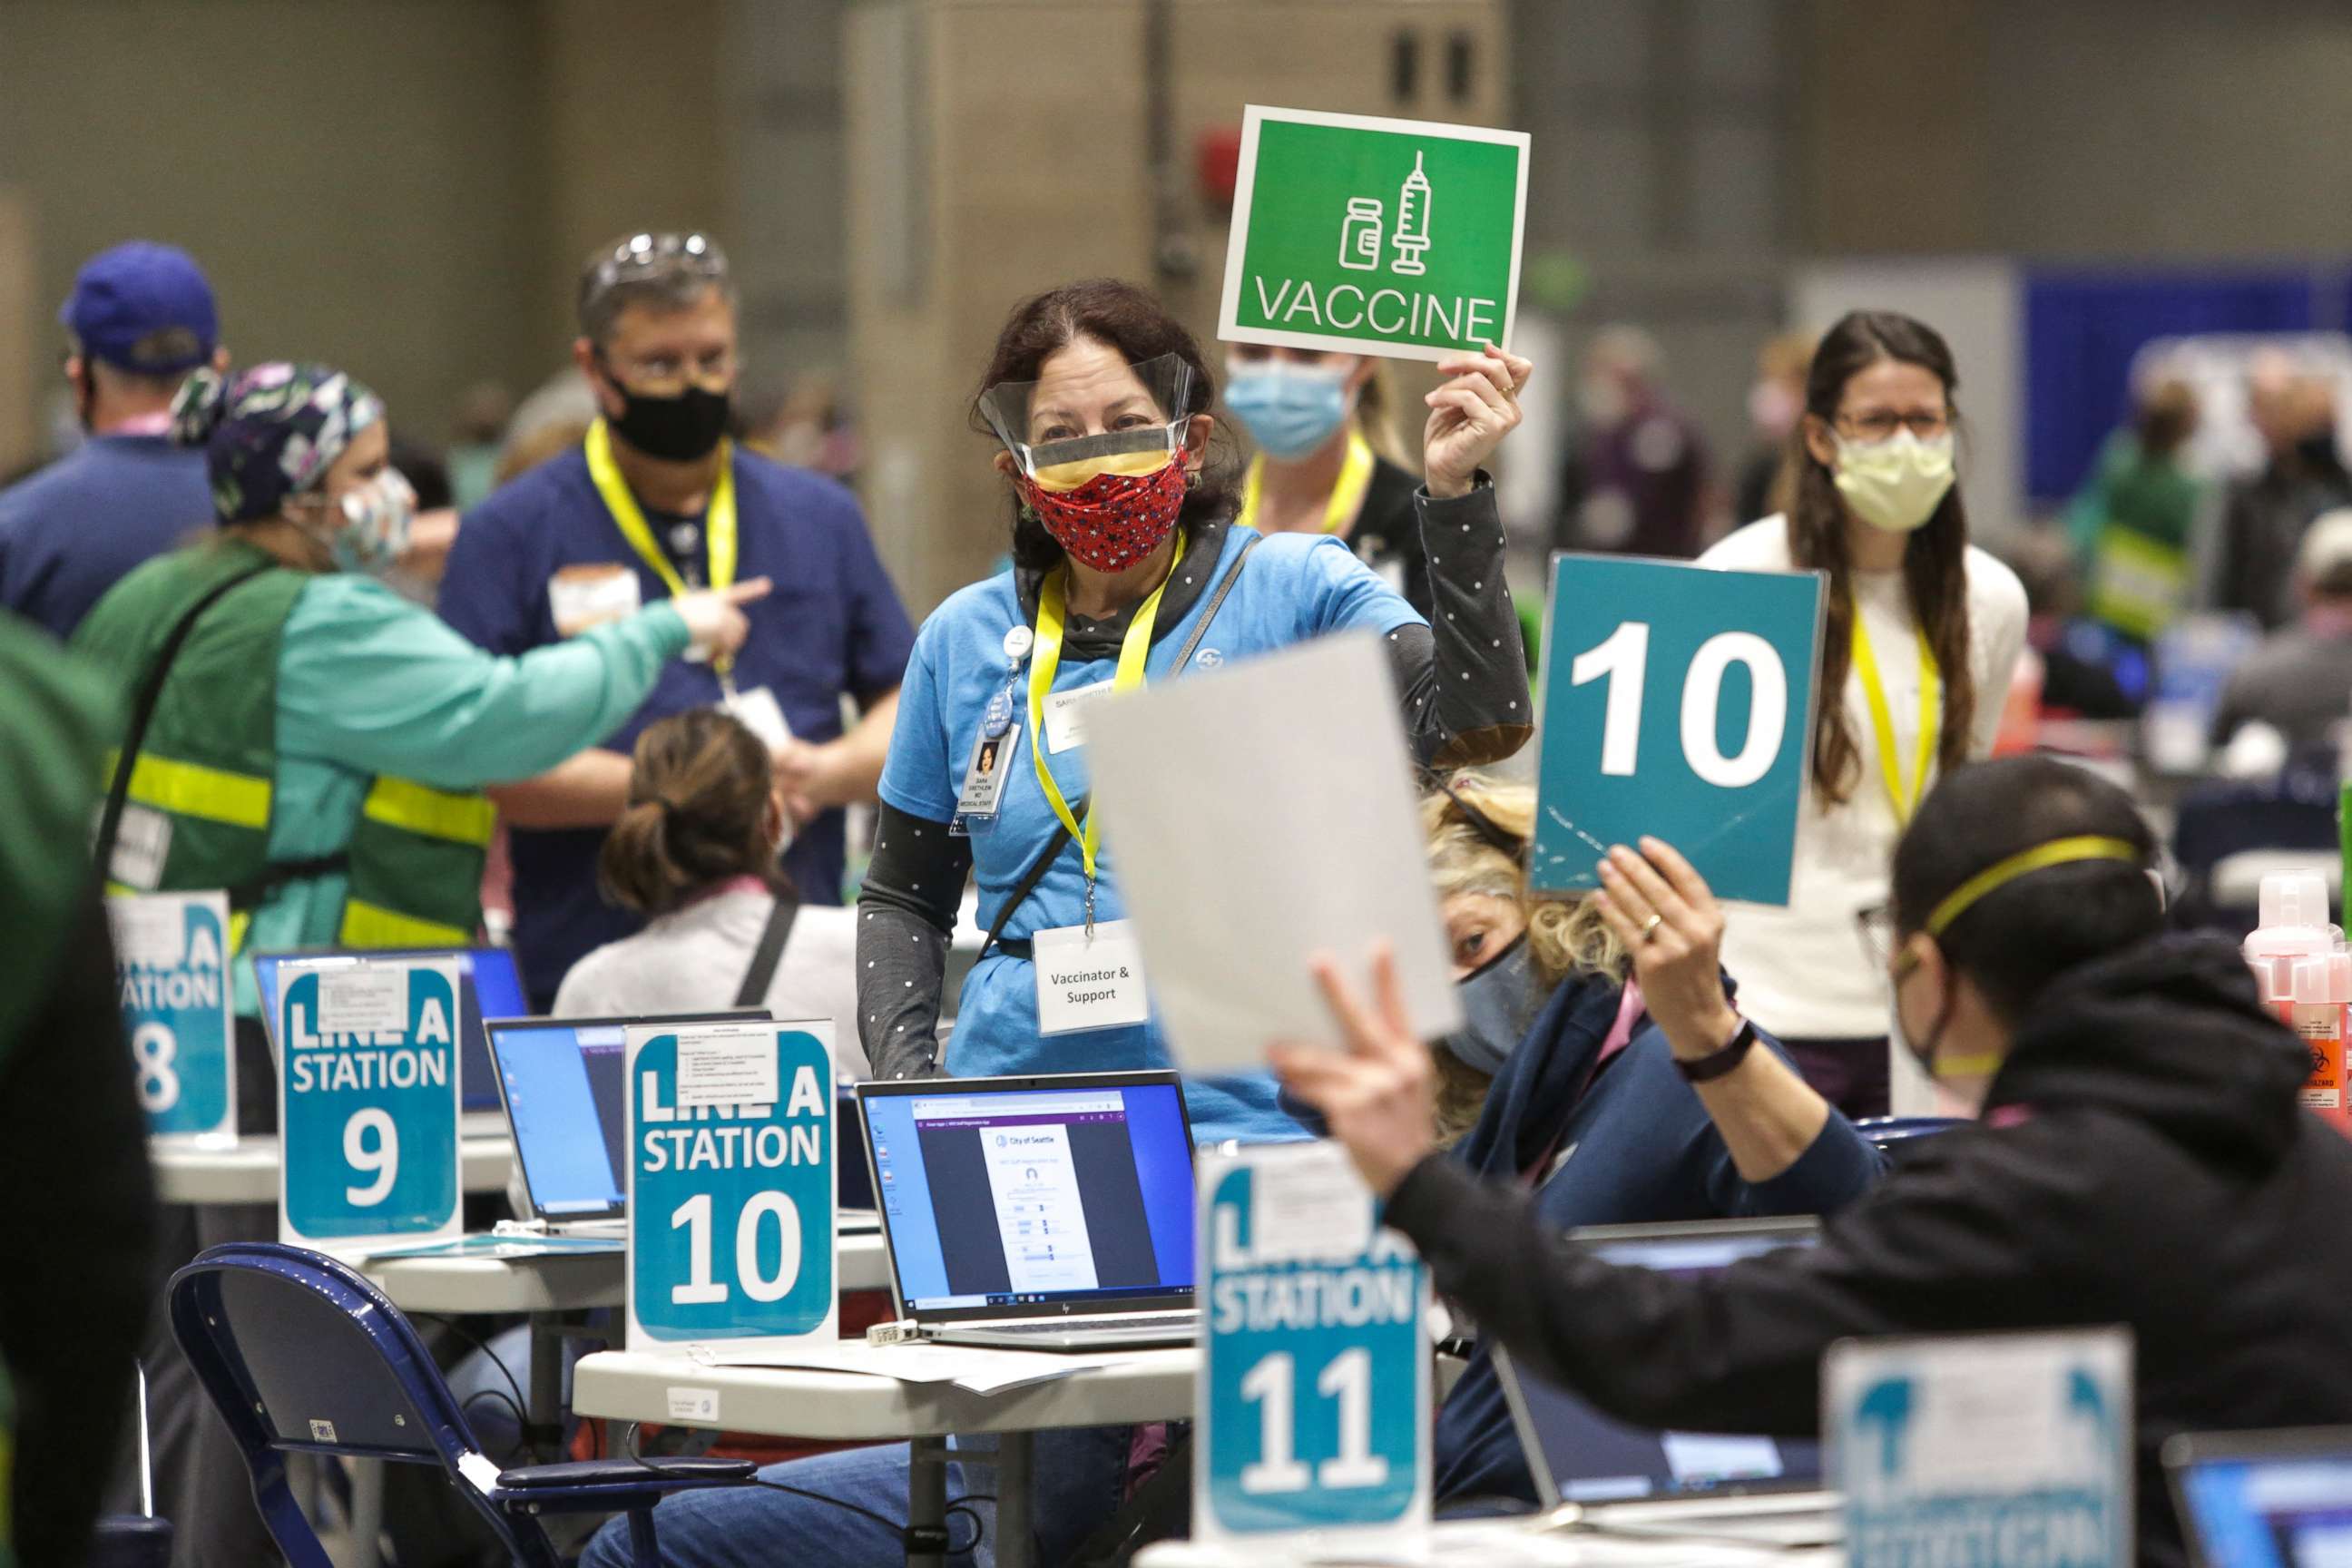 PHOTO: Staff and volunteers work vaccination stations during opening day of the Community Vaccination Site at the Lumen Field Event Center in Seattle, on March 13, 2021.